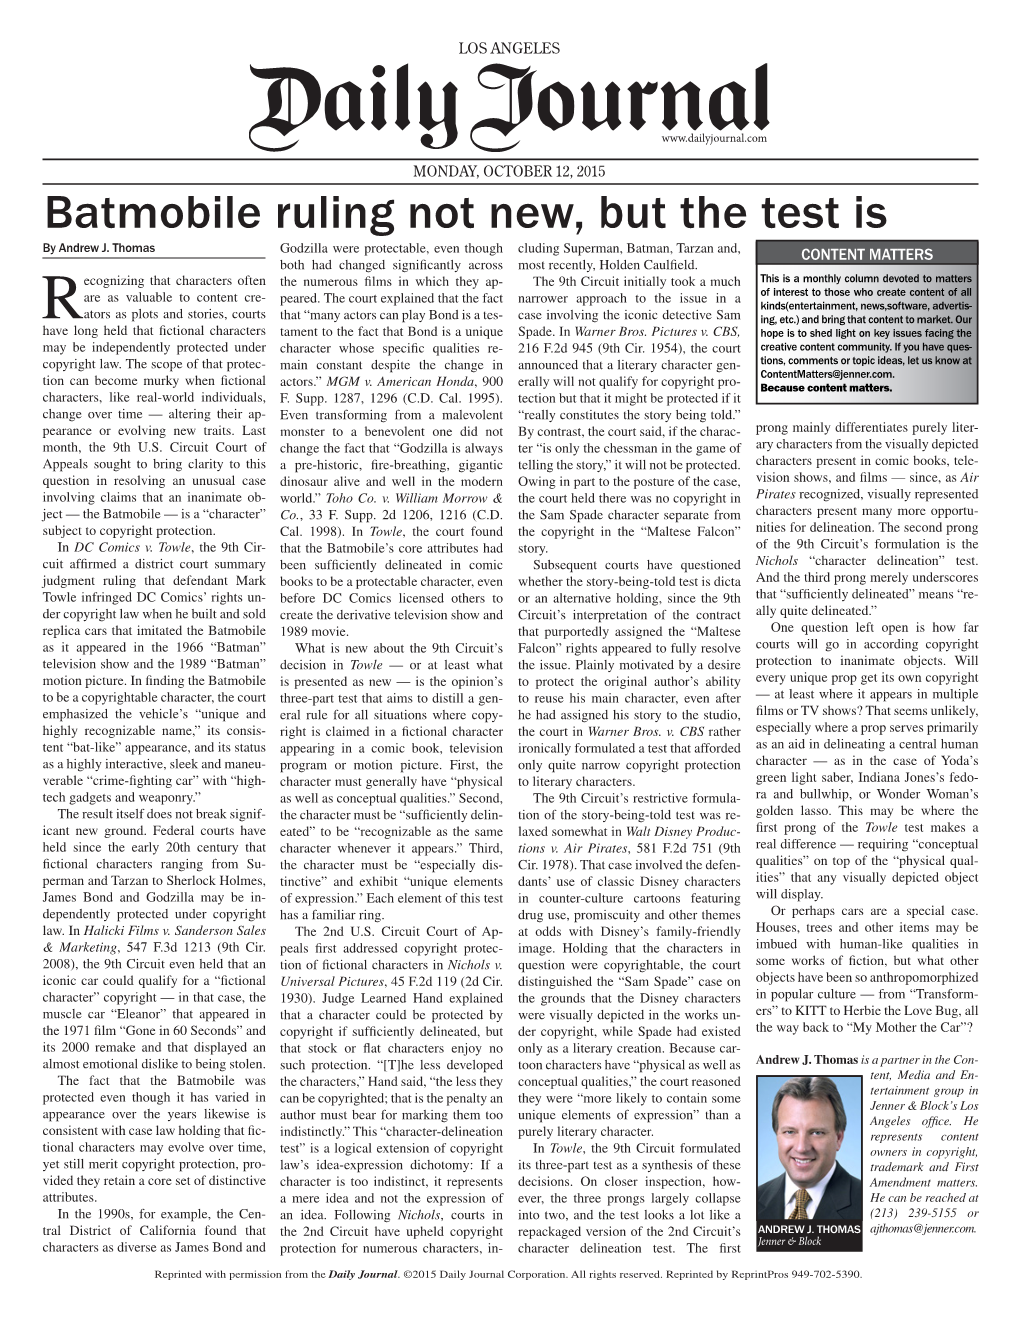 Batmobile Ruling Not New, but the Test Is